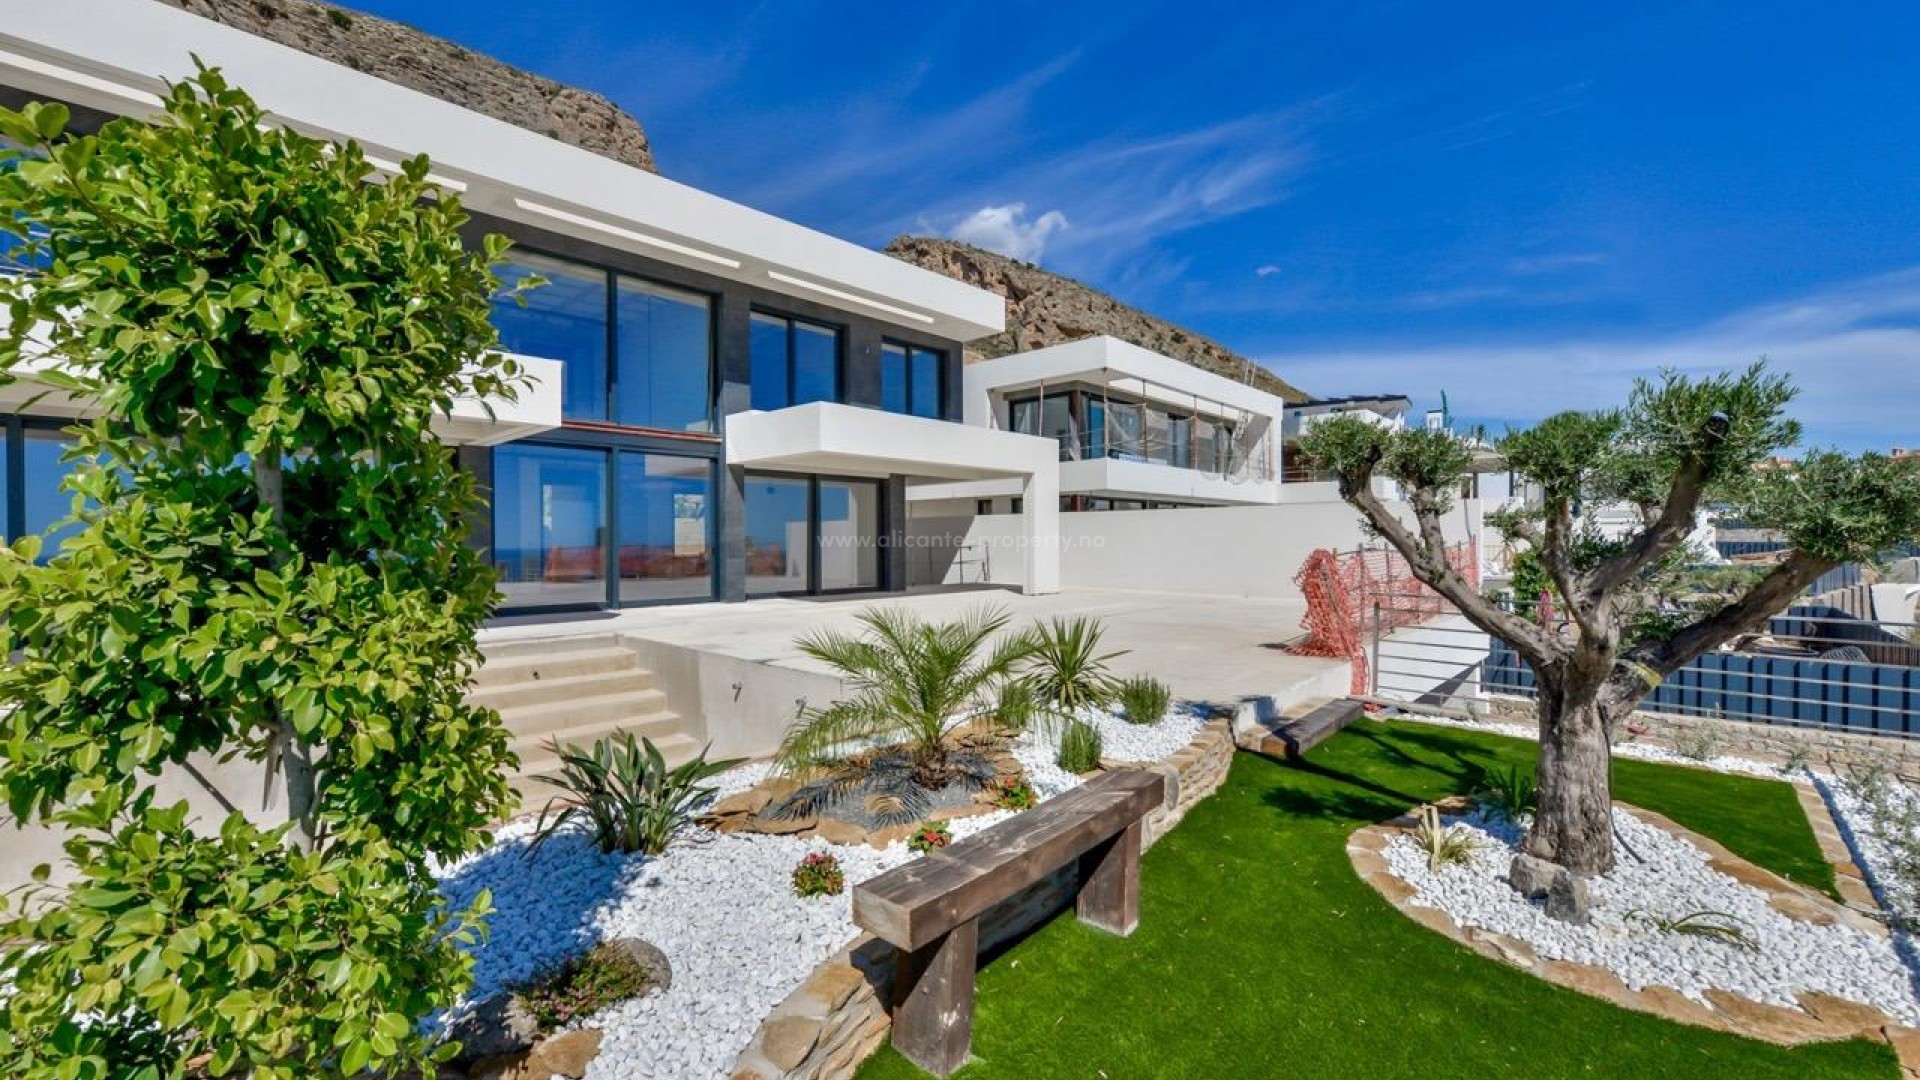 Luxury villa in Sierra Cortina, Finestrat with 8 bedrooms, 5 bathrooms, 998 m2, fantastic swimming pool of 54 m2, panoramic sea views, 2 covered terraces